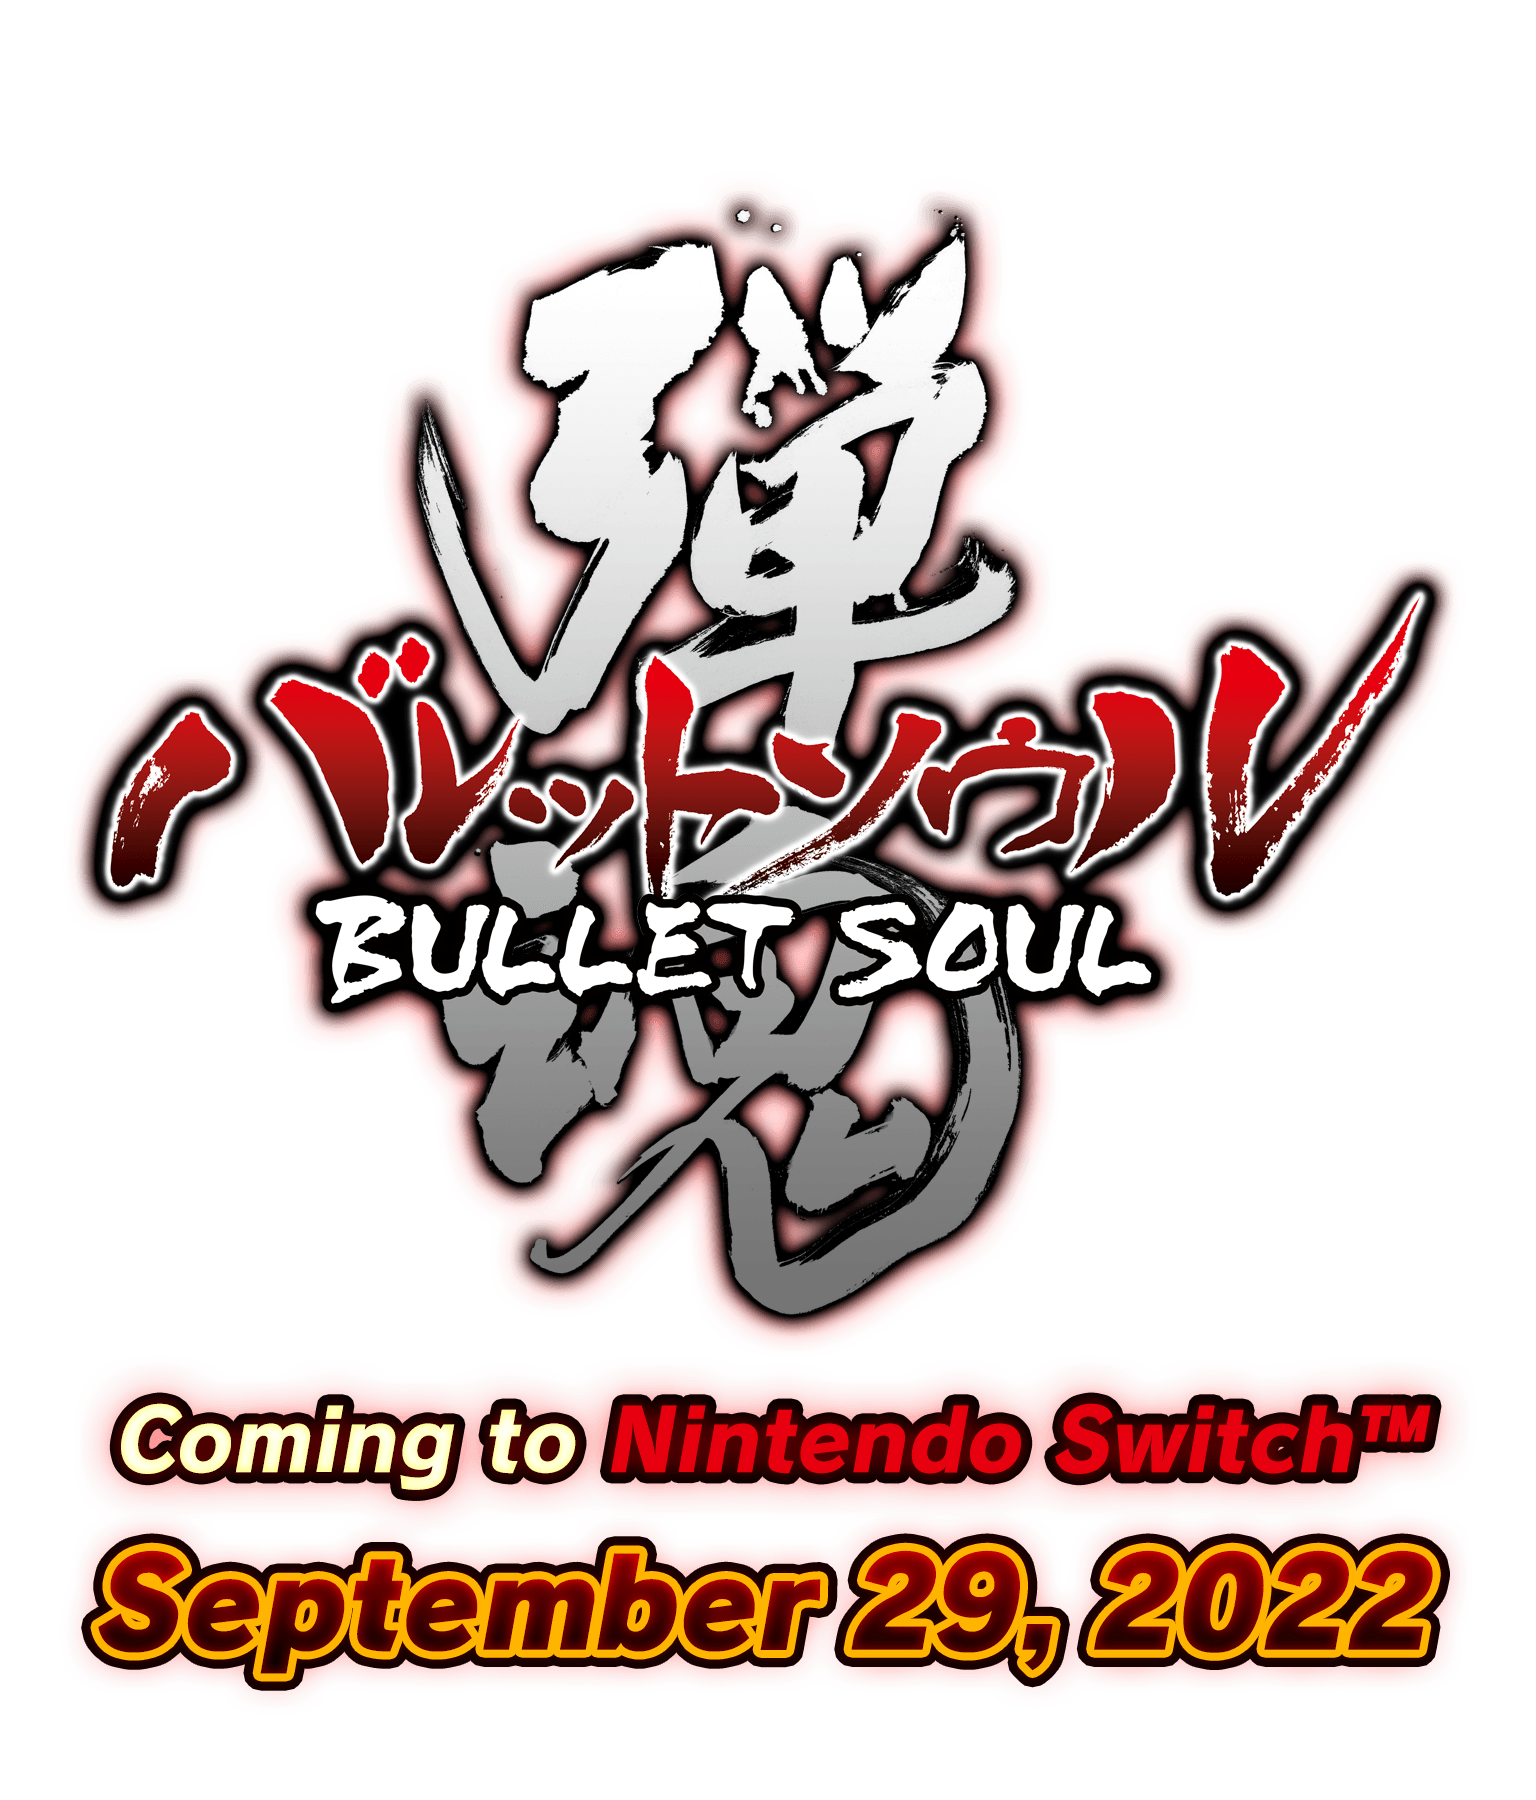 BULLET SOUL Coming to Nintendo Switch™ September 29, 2022